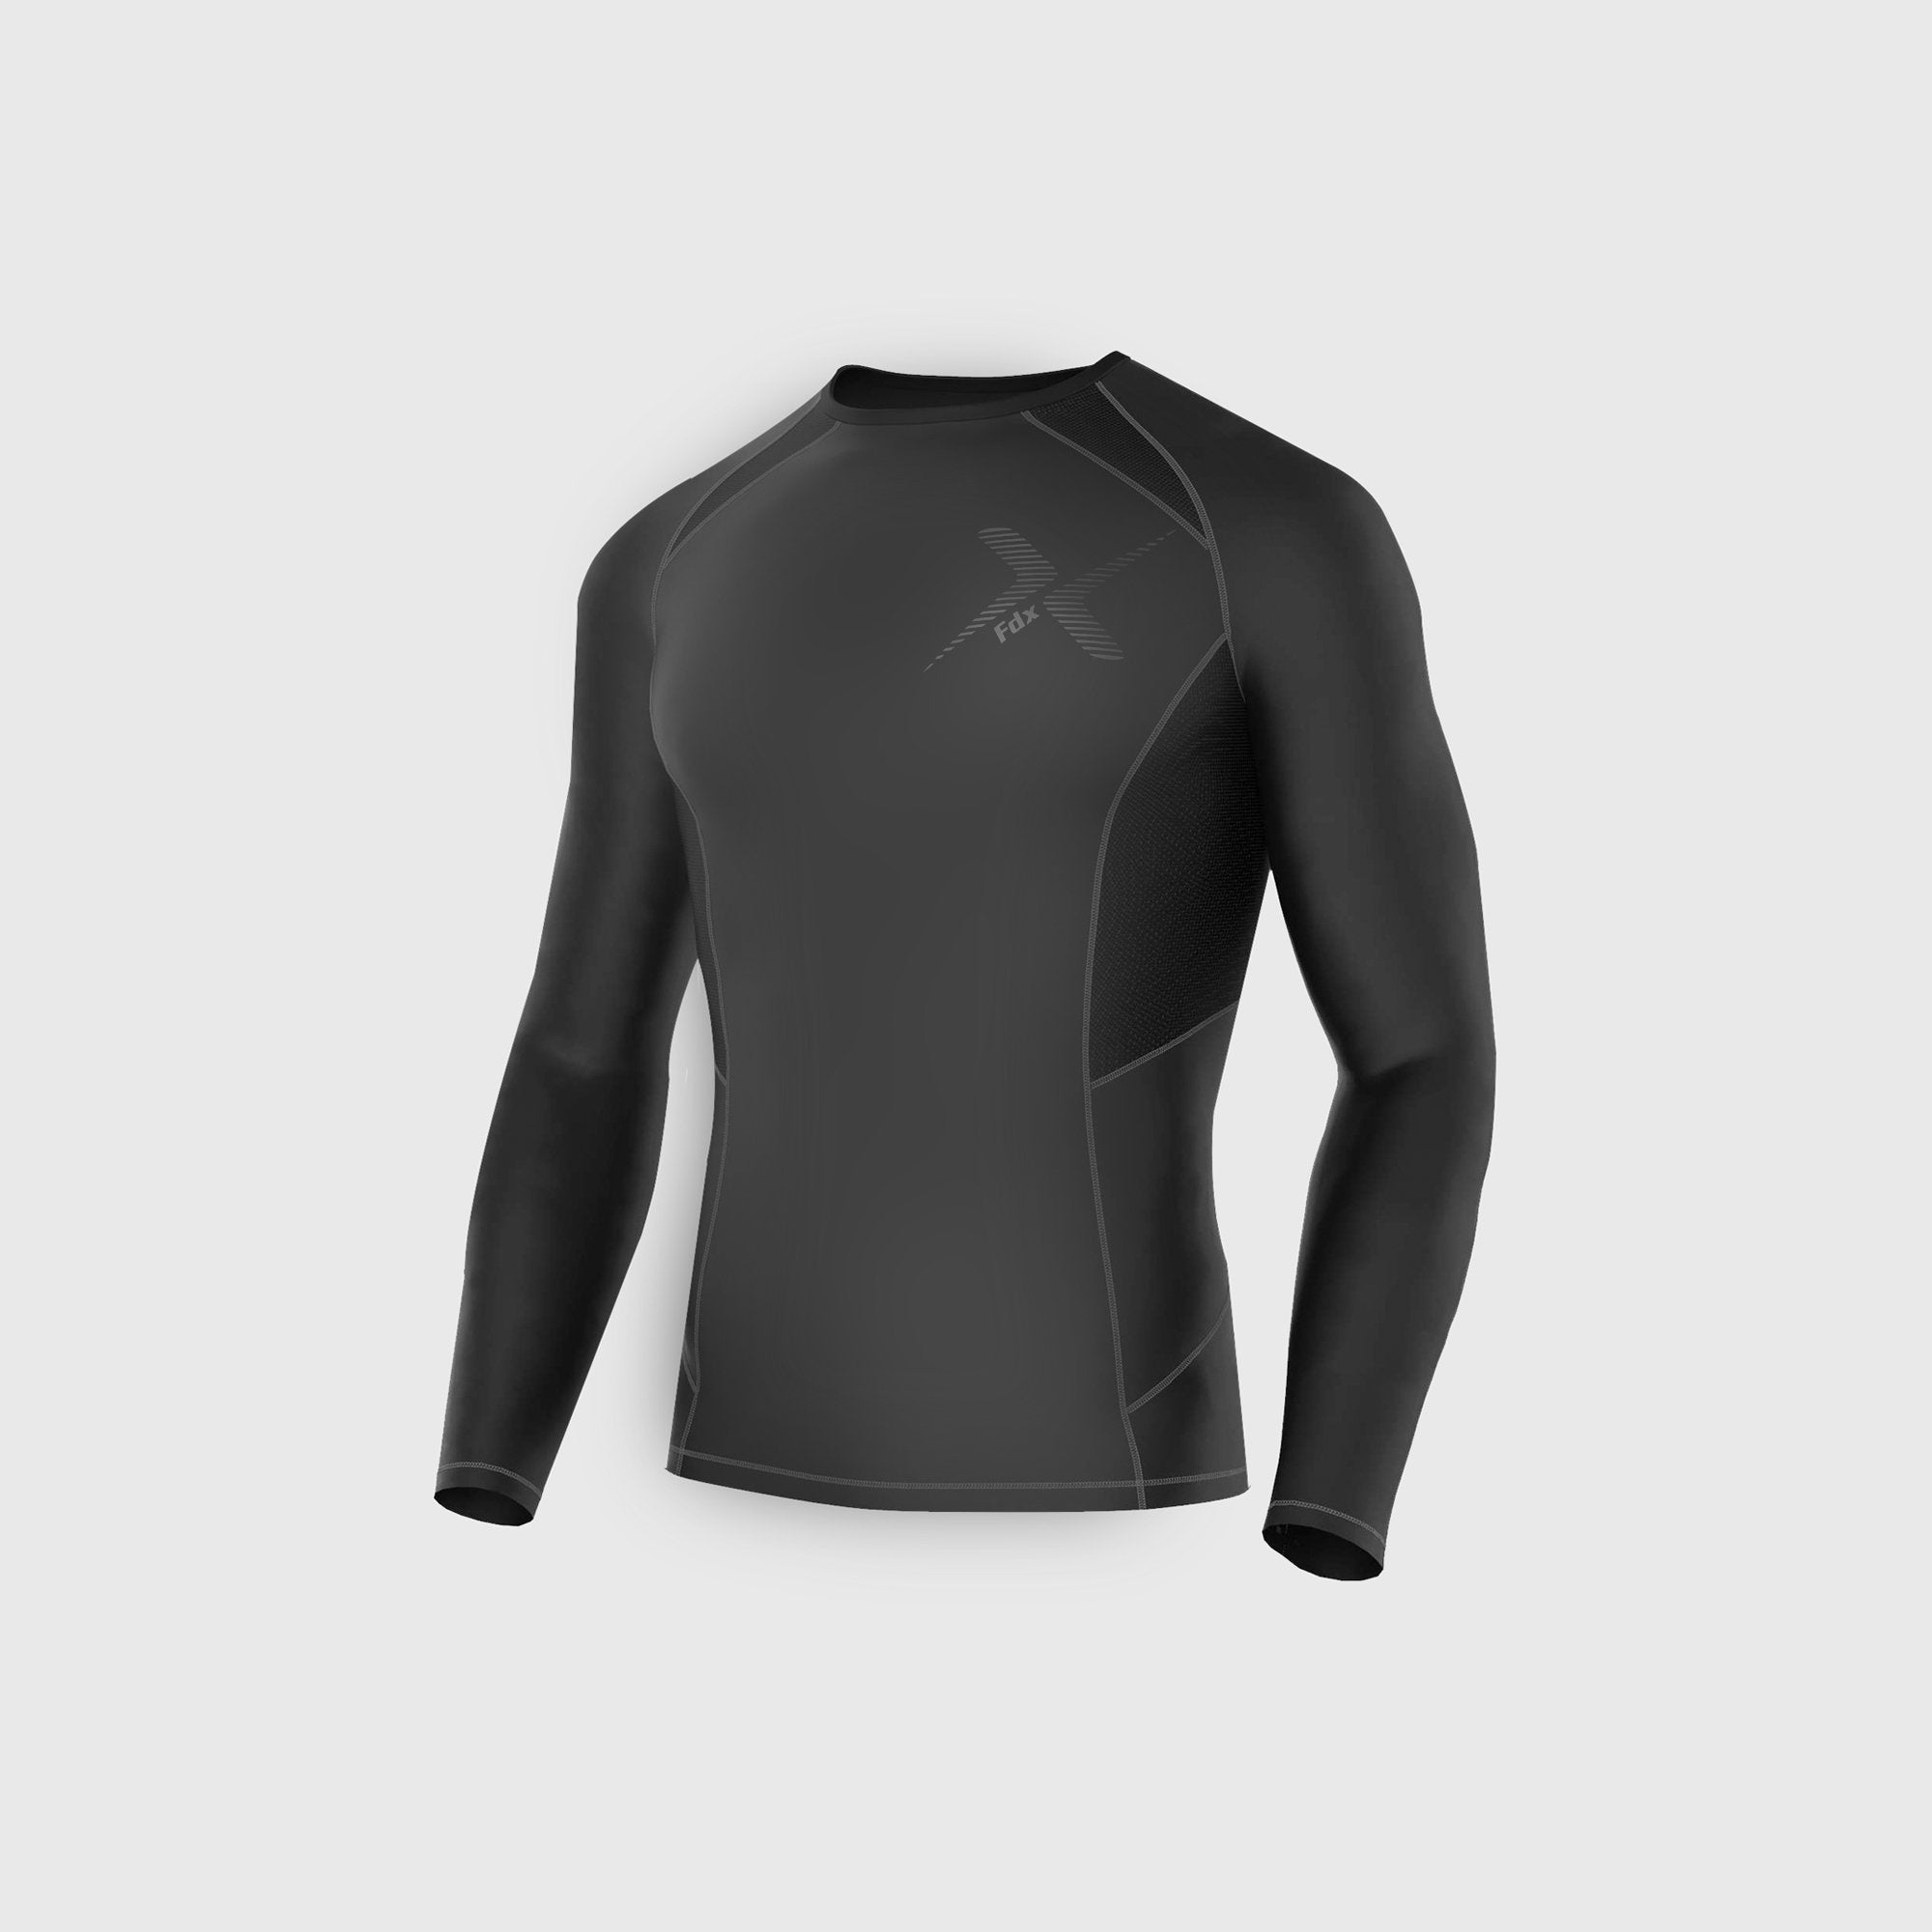 Fdx Best Men's Black Long Sleeve Compression Top Running Gym Workout Wear Rash Guard Stretchable Breathable - Recoil